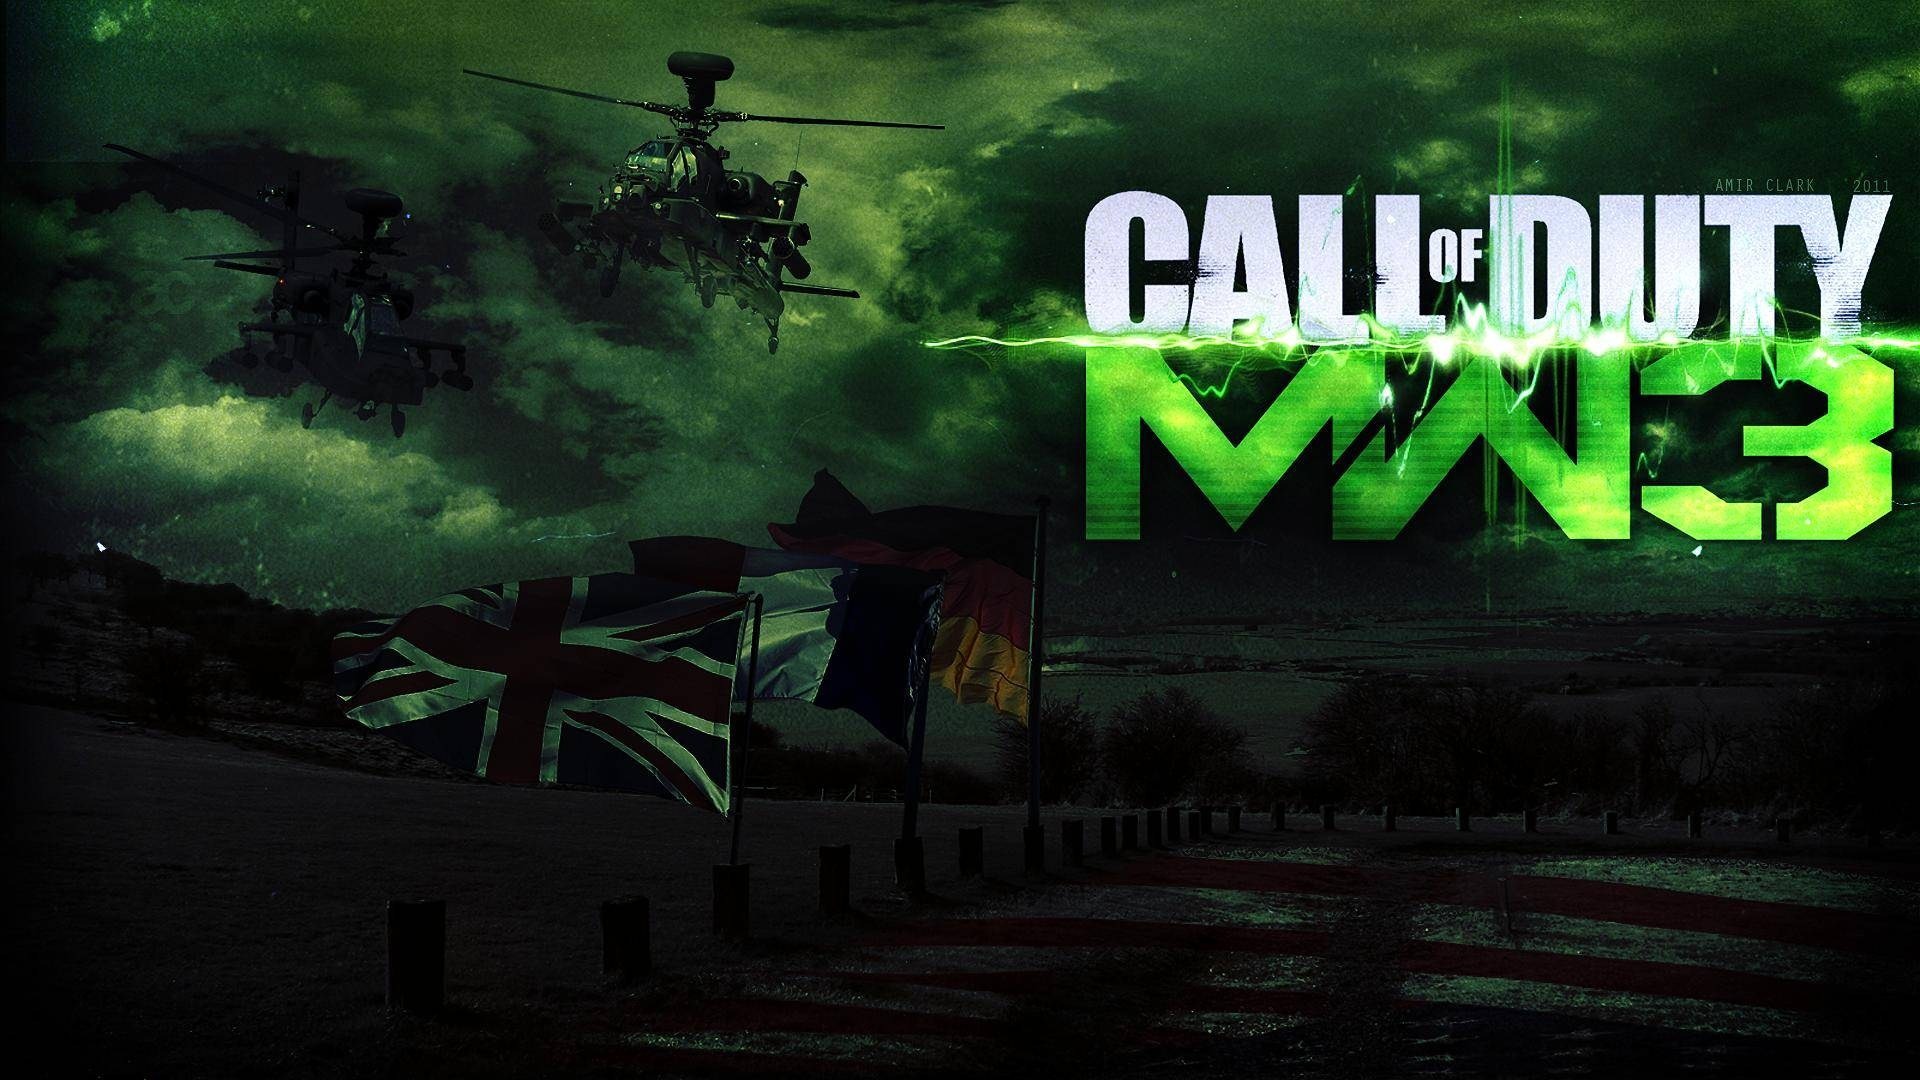 Call of Duty: MW3 wallpapers HD #3 - 1920x1080